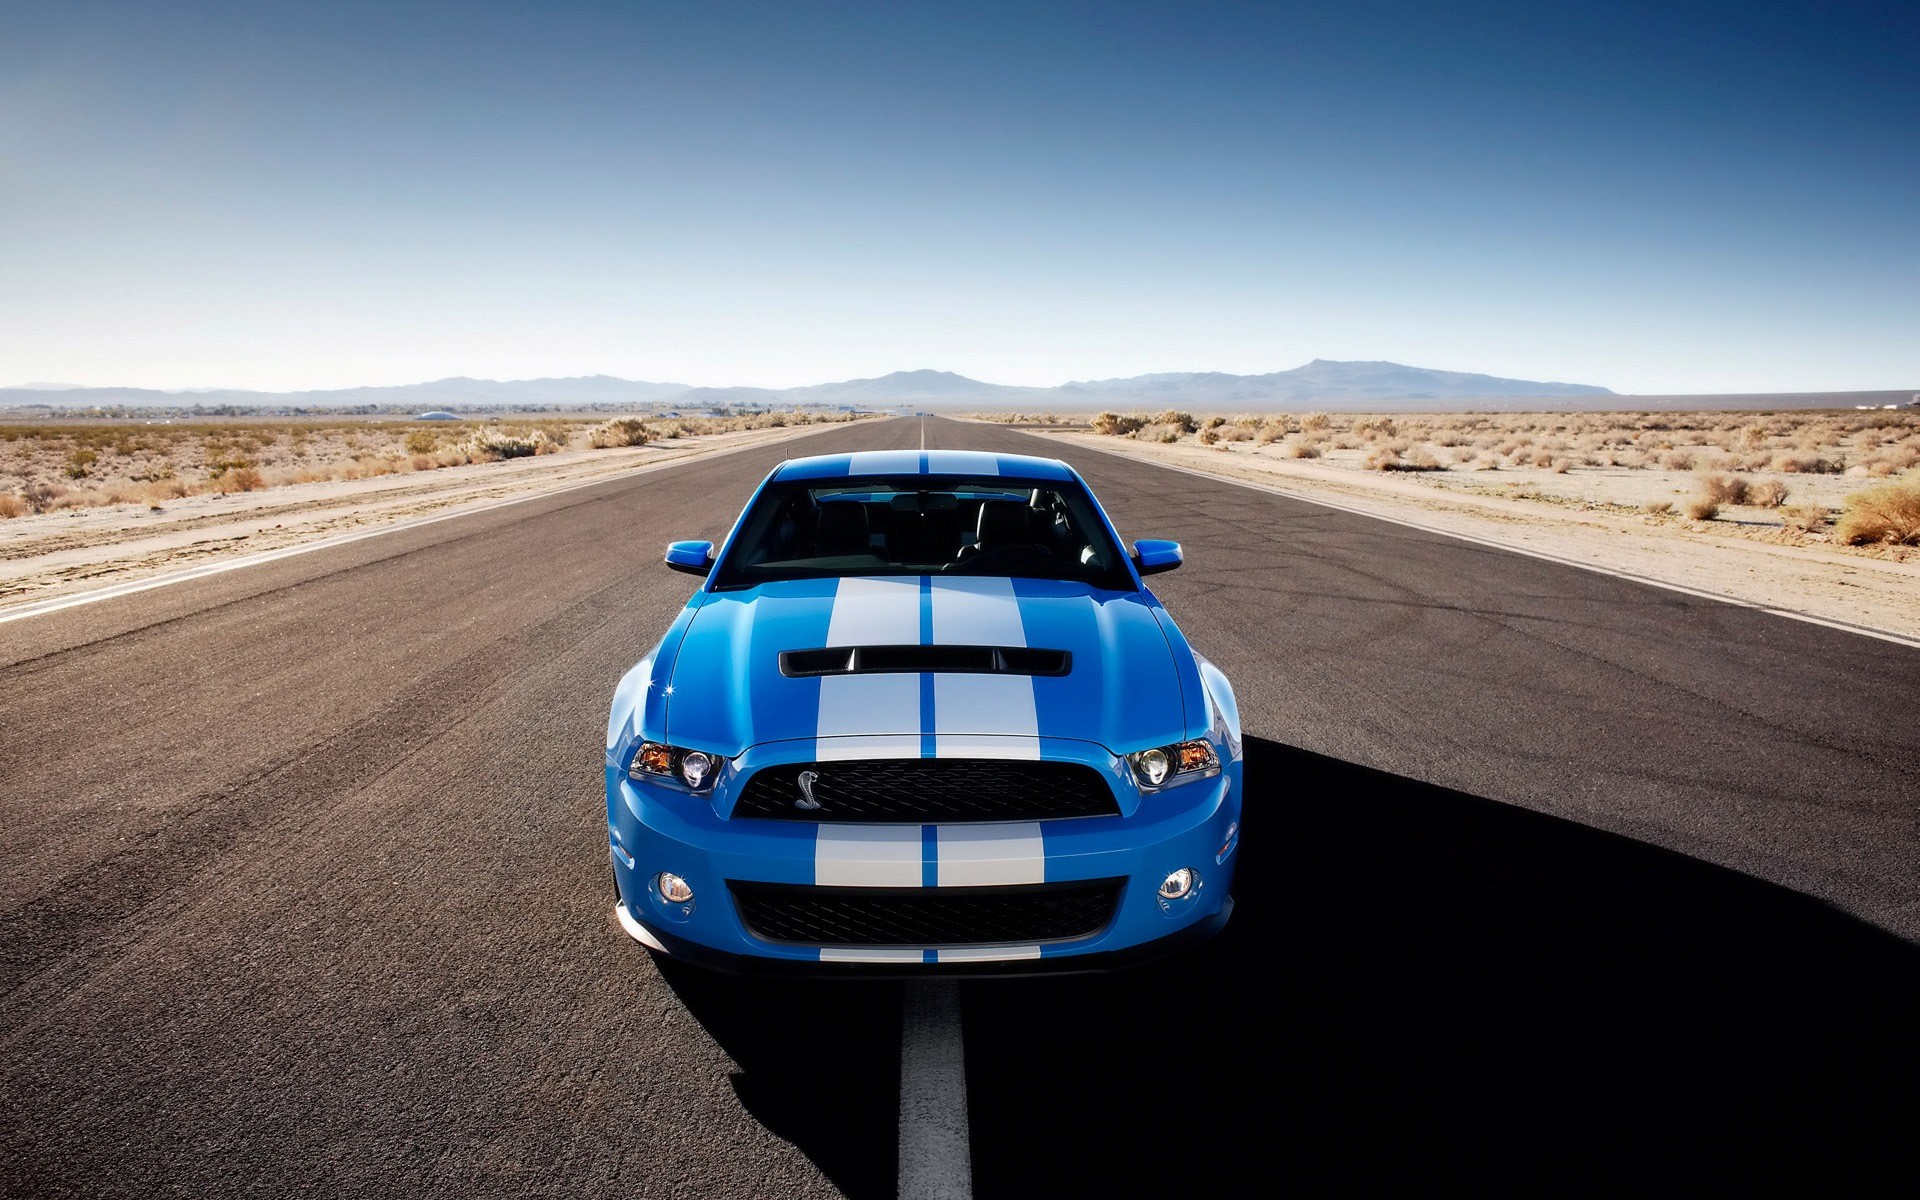 General 1920x1200 Shelby Ford Mustang Shelby road car asphalt blue cars vehicle desert Ford Ford Mustang S-197 II Ford Mustang racing stripes American cars